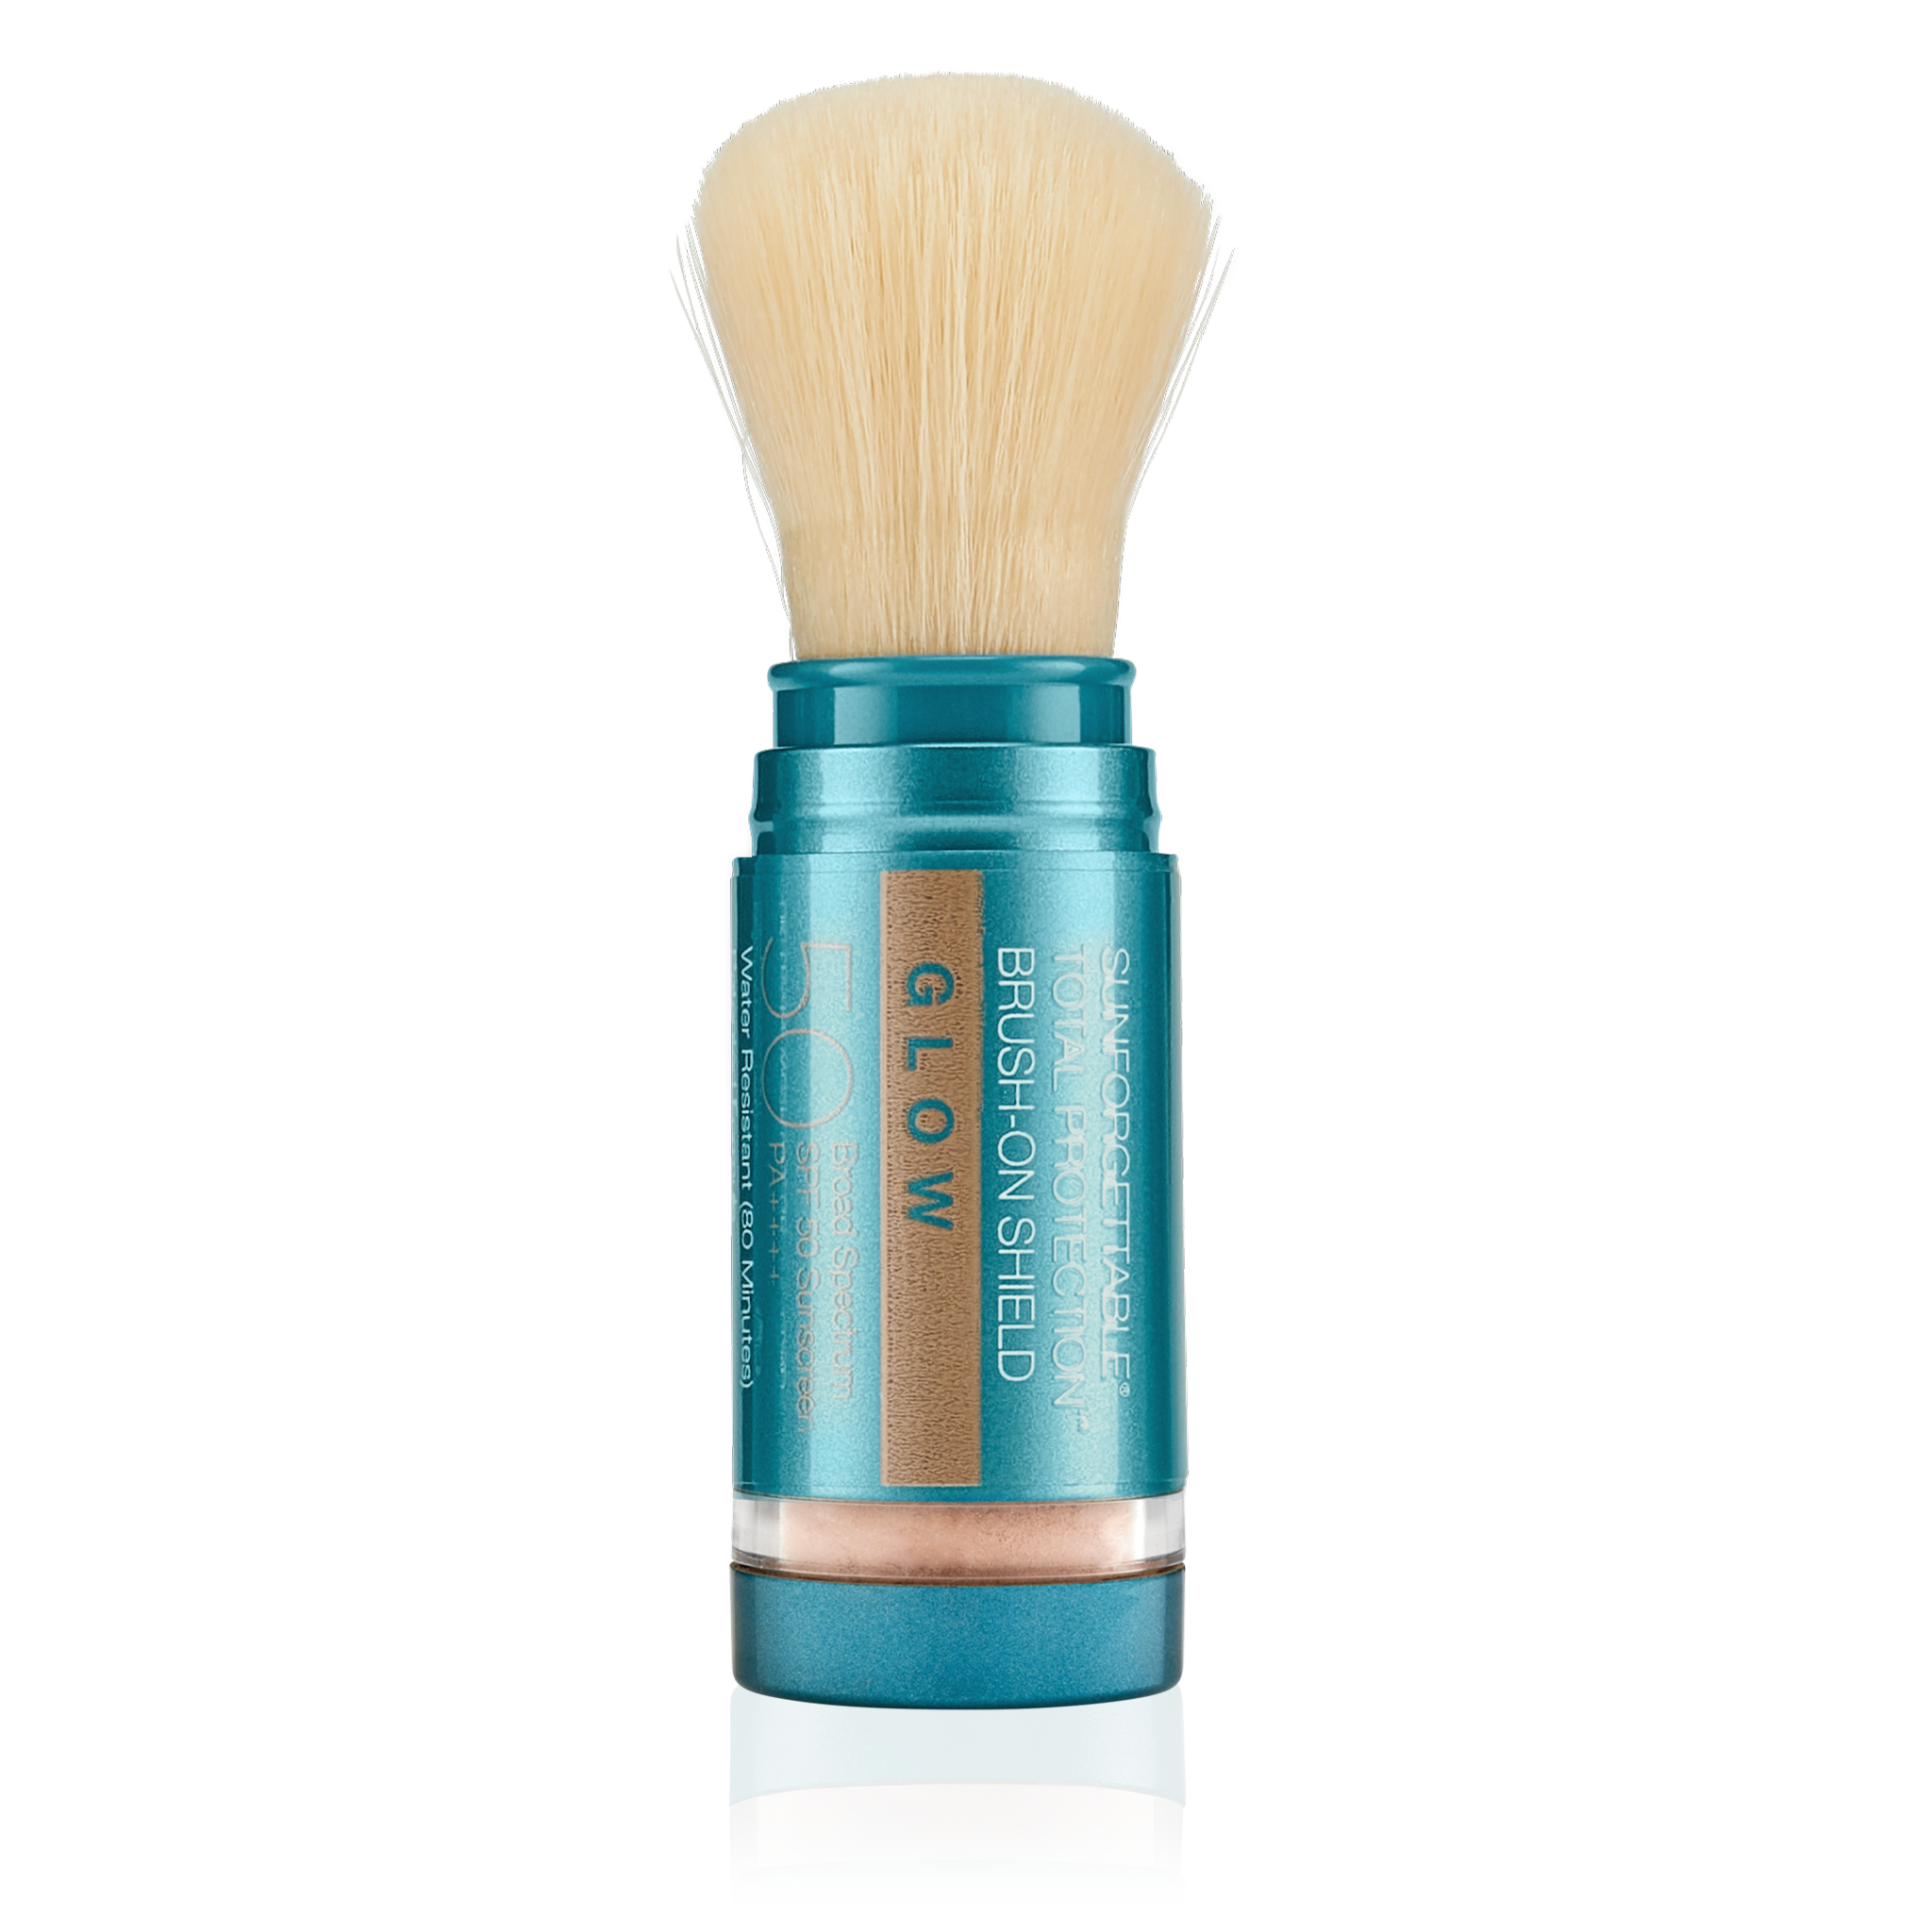 Mini Sunforgettable® Total Protection® Brush-On Shield Glow SPF 50 || Mini Sunforgettable® Total Protection® Brush-On Shield Glow SPF 50